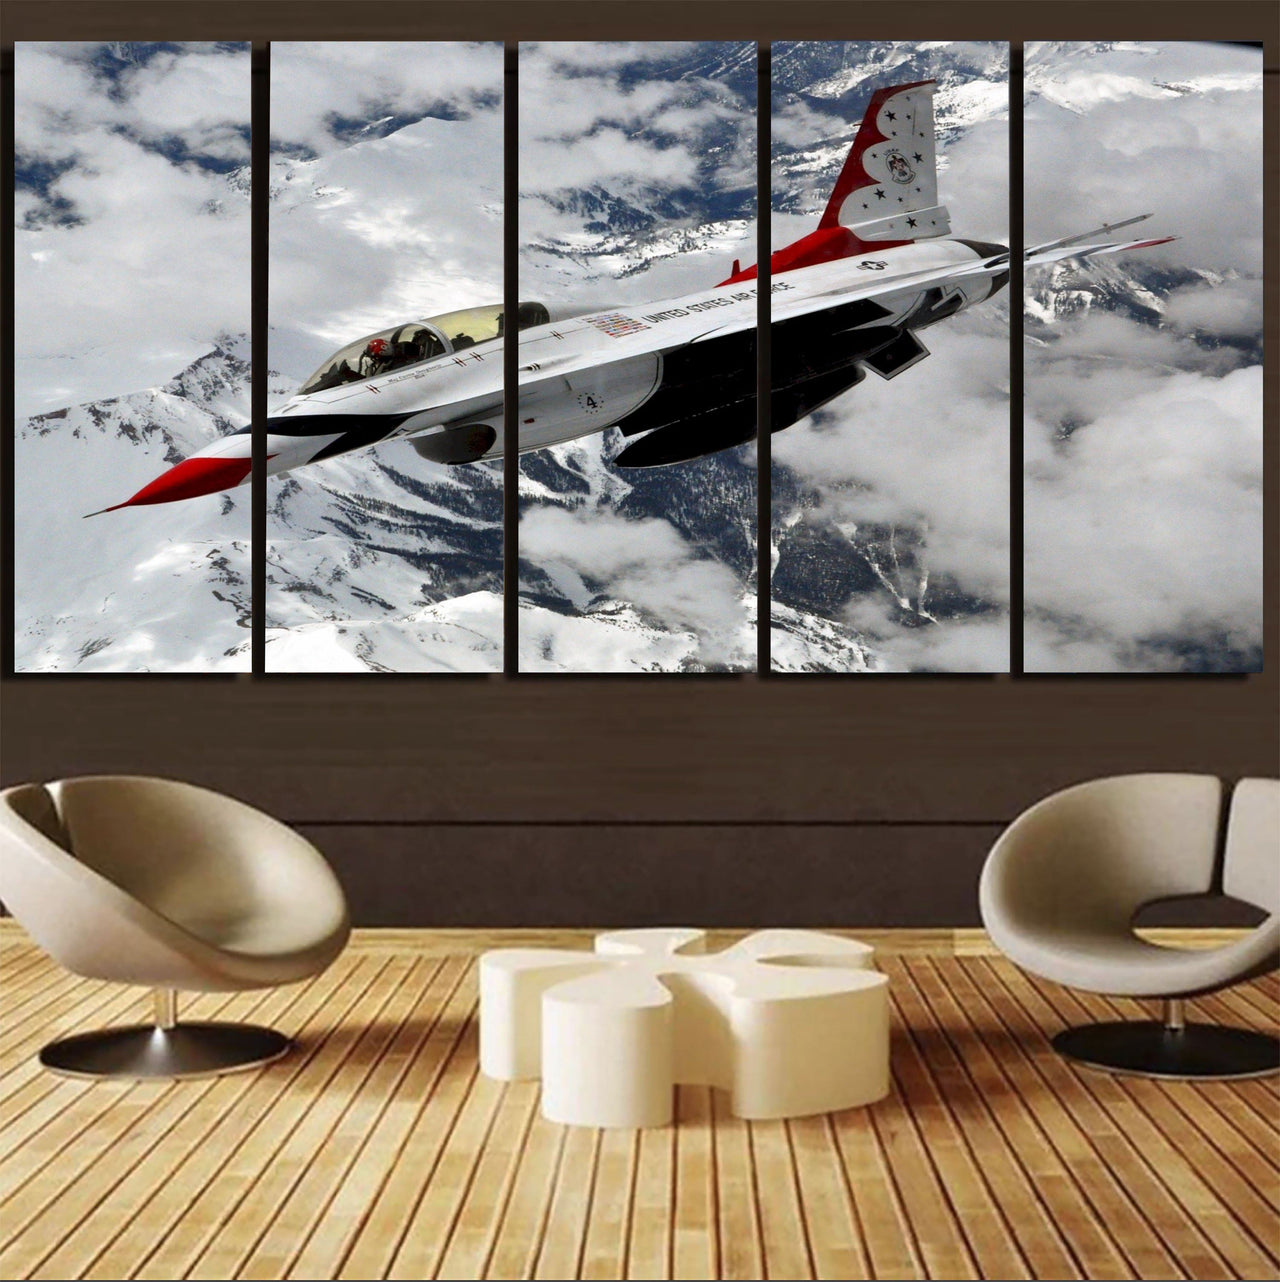 US AirForce Show Fighting Falcon F16 Printed Canvas Prints (5 Pieces) Aviation Shop 